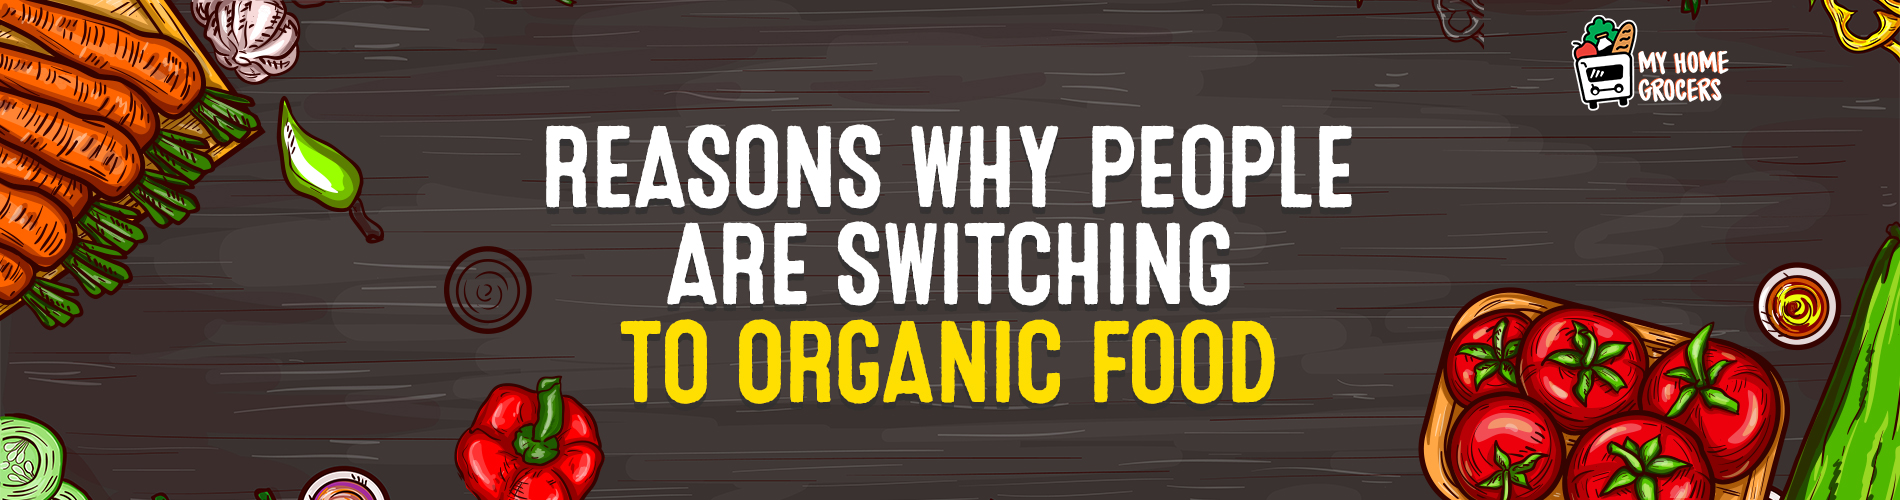 5 Reasons To Switch To Organic Food For A Healthier Life